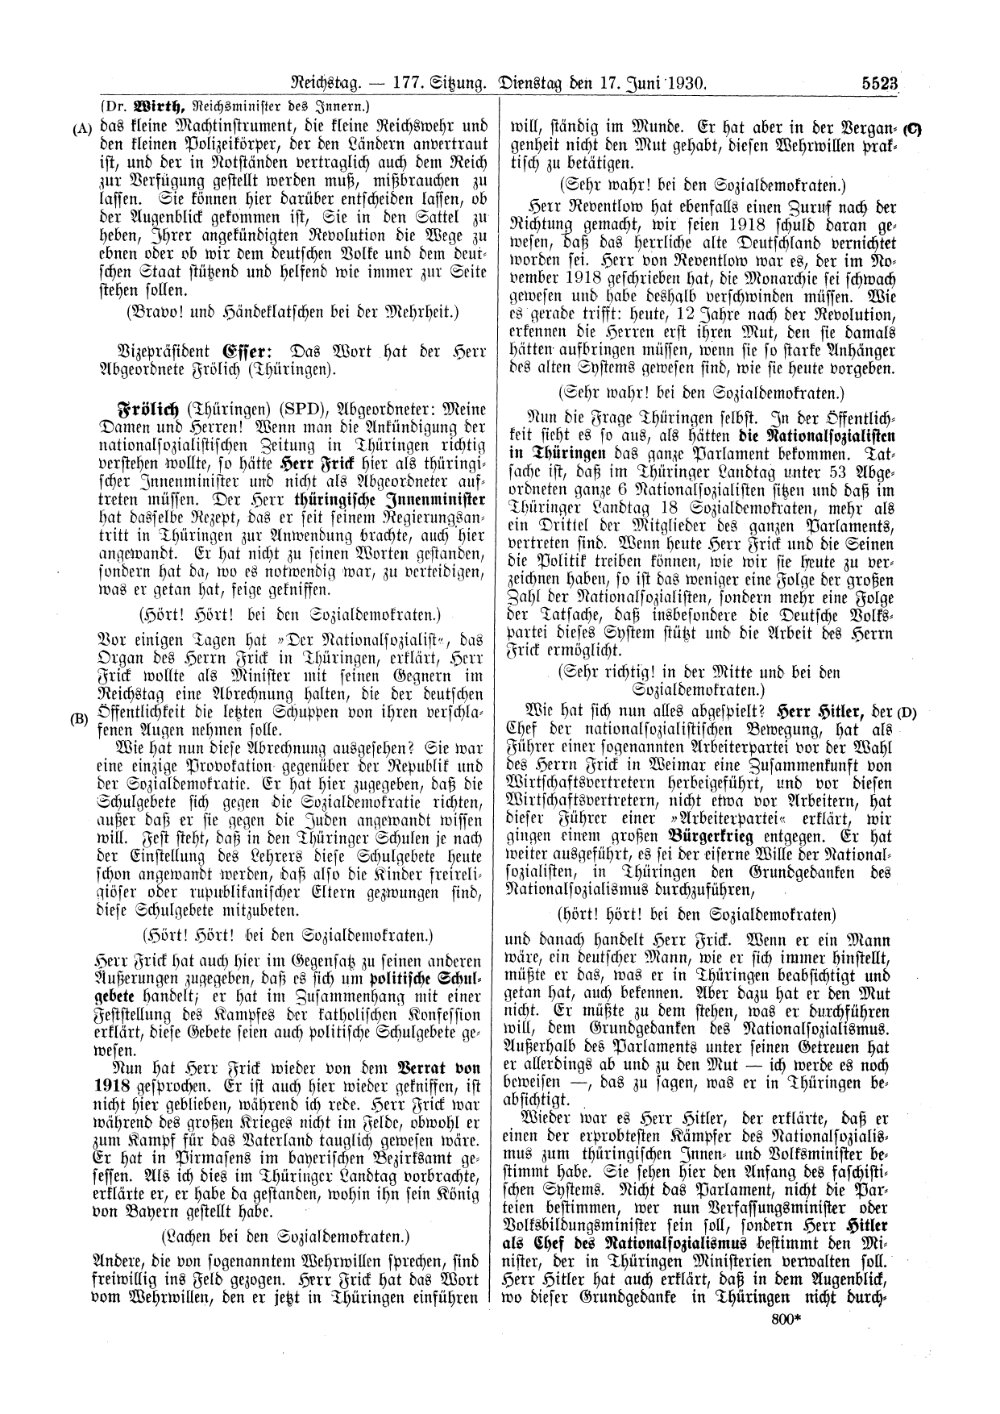 Scan of page 5523